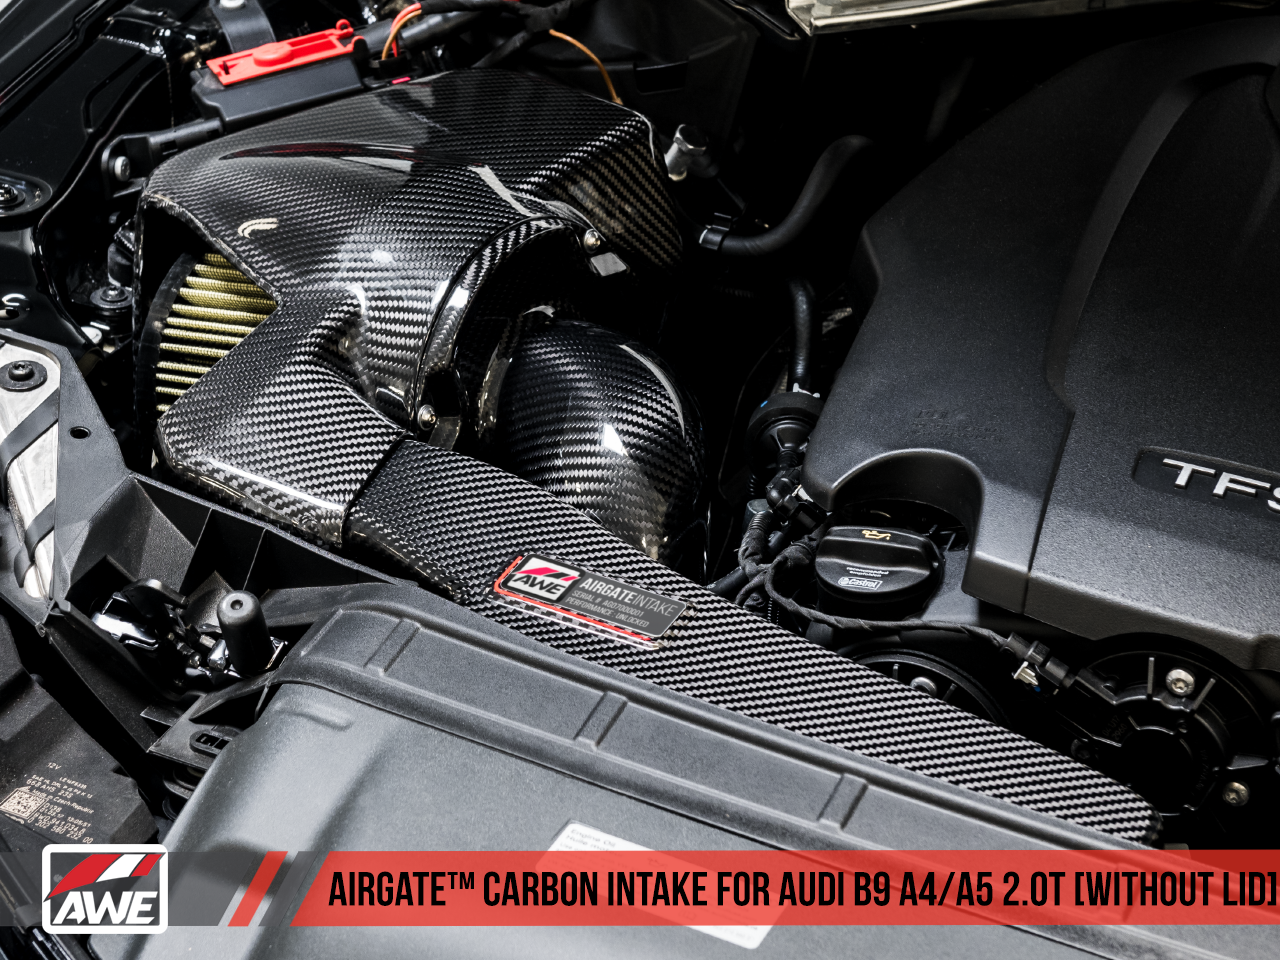 AWE AirGate™ Carbon Fiber Intake for Audi B9 A4 / A5 2.0T - Without Lid